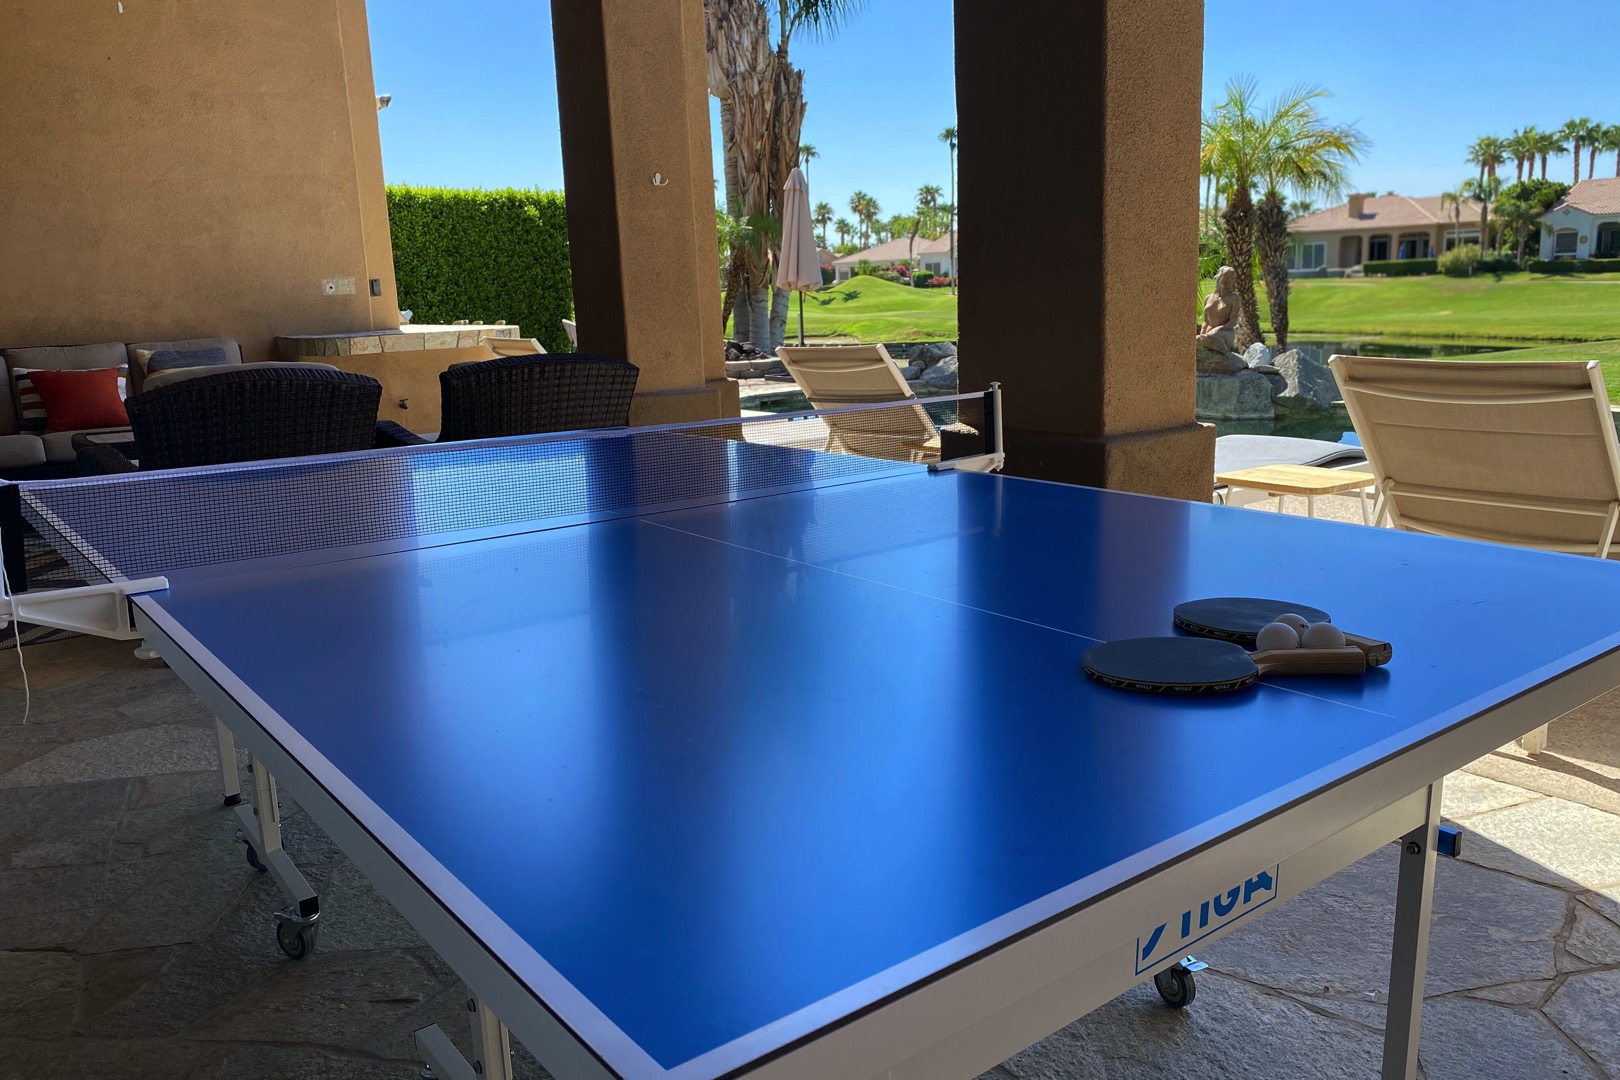 Need some action? Challenge a friend to a friendly game of Ping Pong!